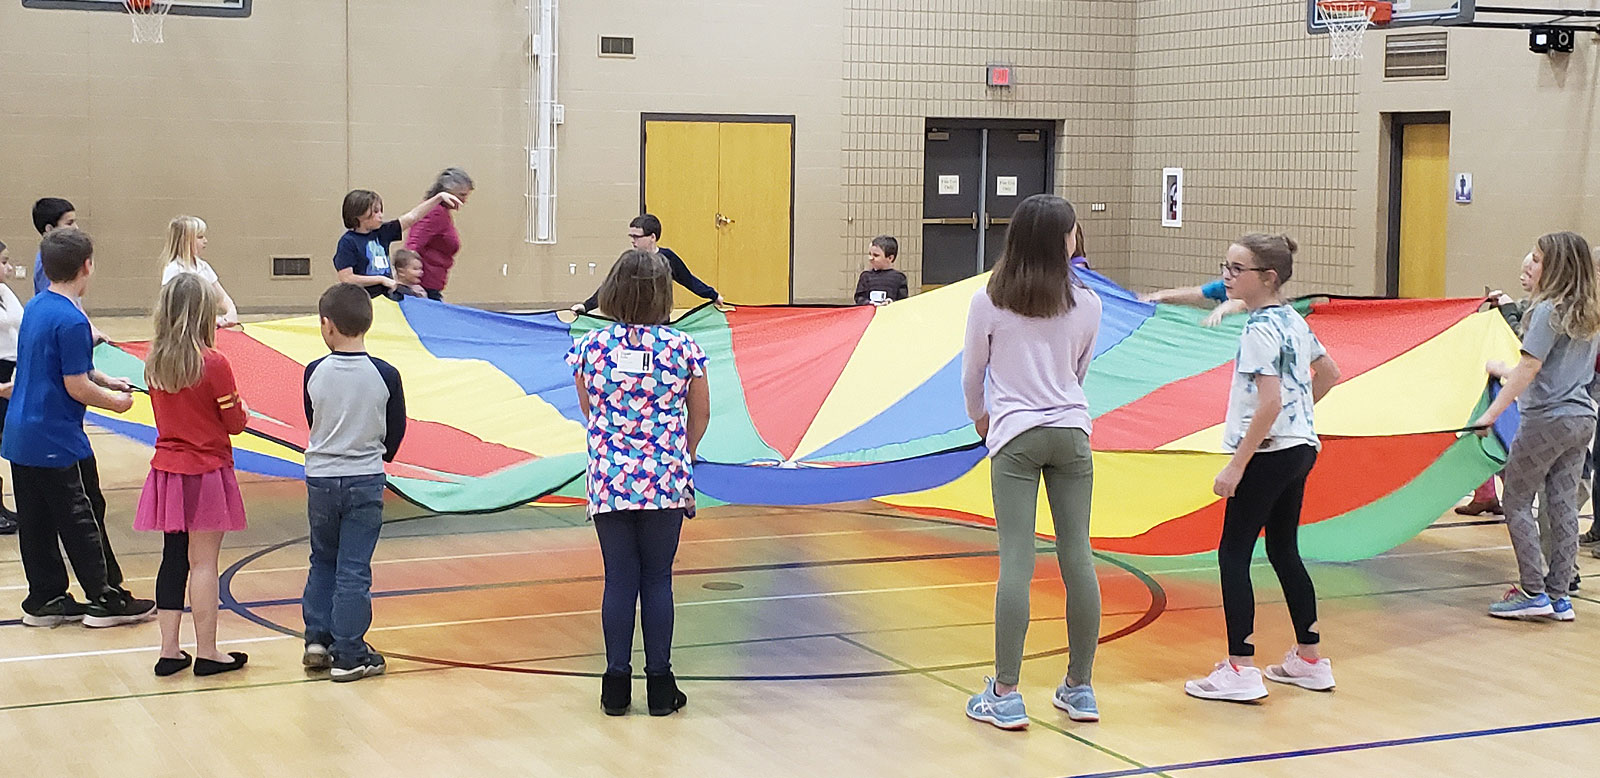 KidsWay playing with parachute